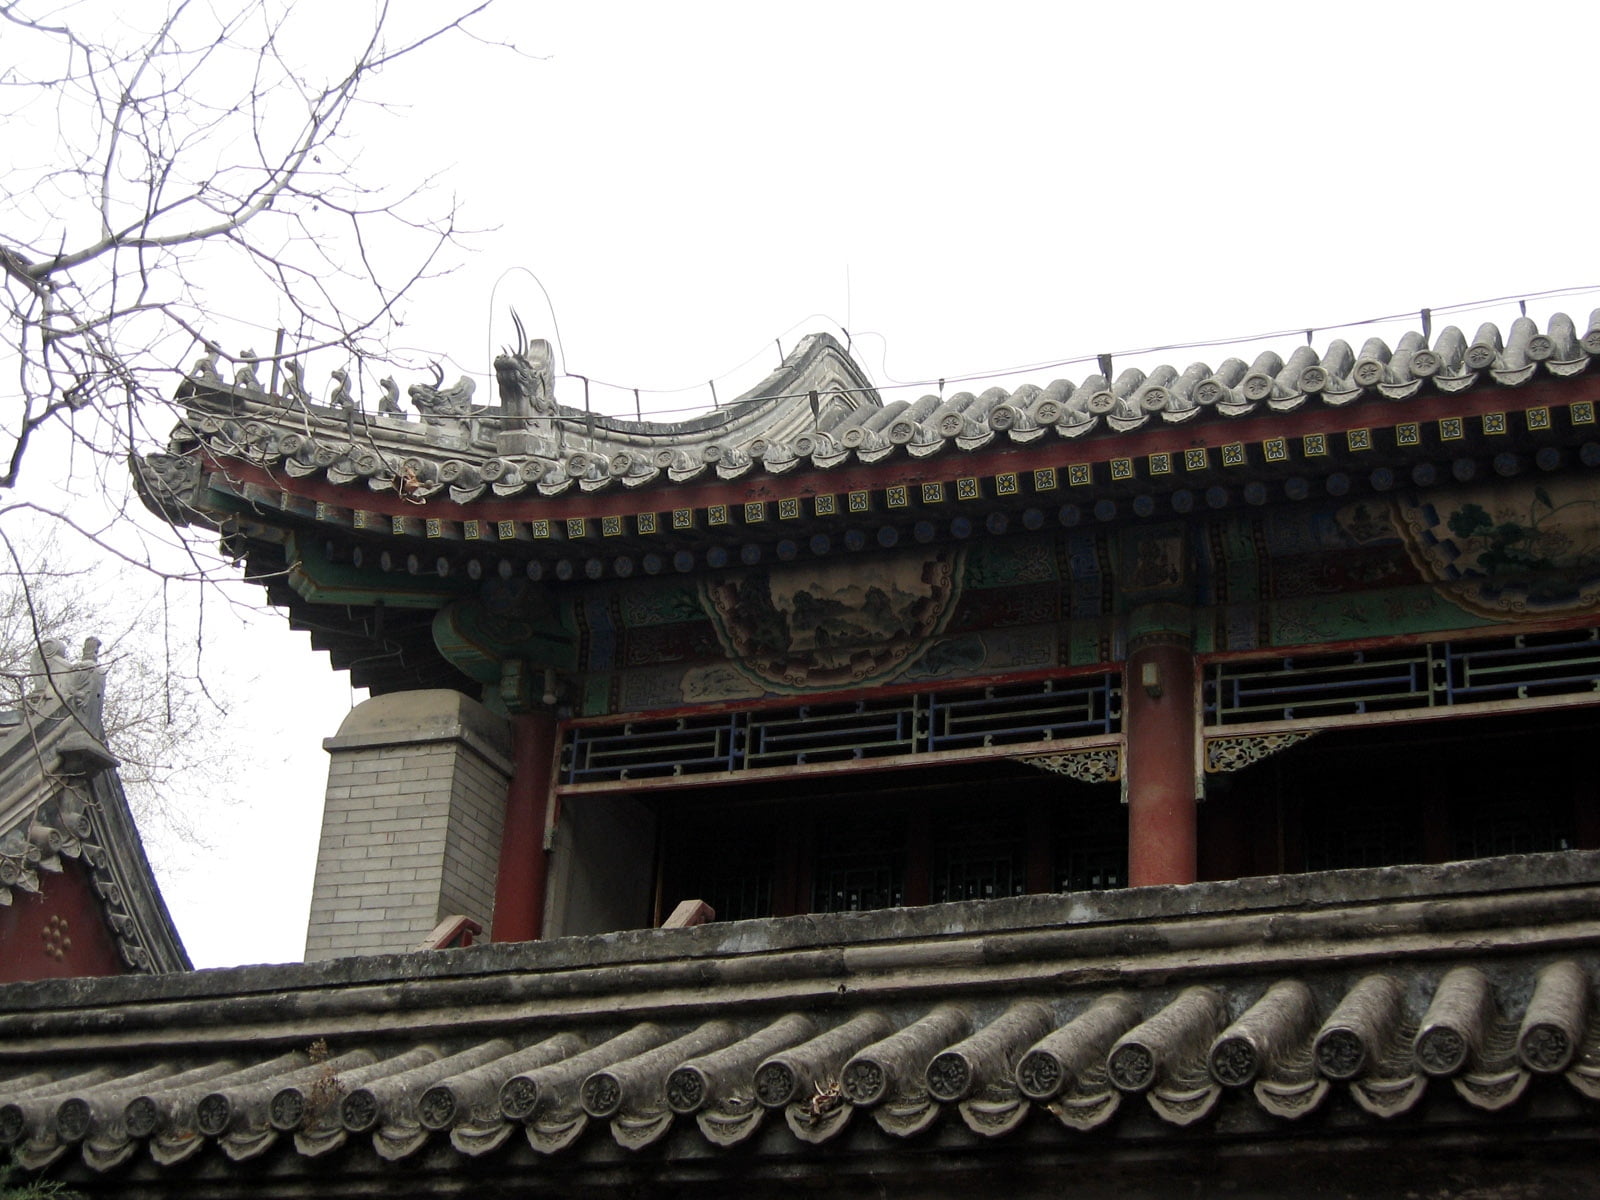 brow and red temple, china, roof, sky, dark, cloudy, asia, china - East Asia